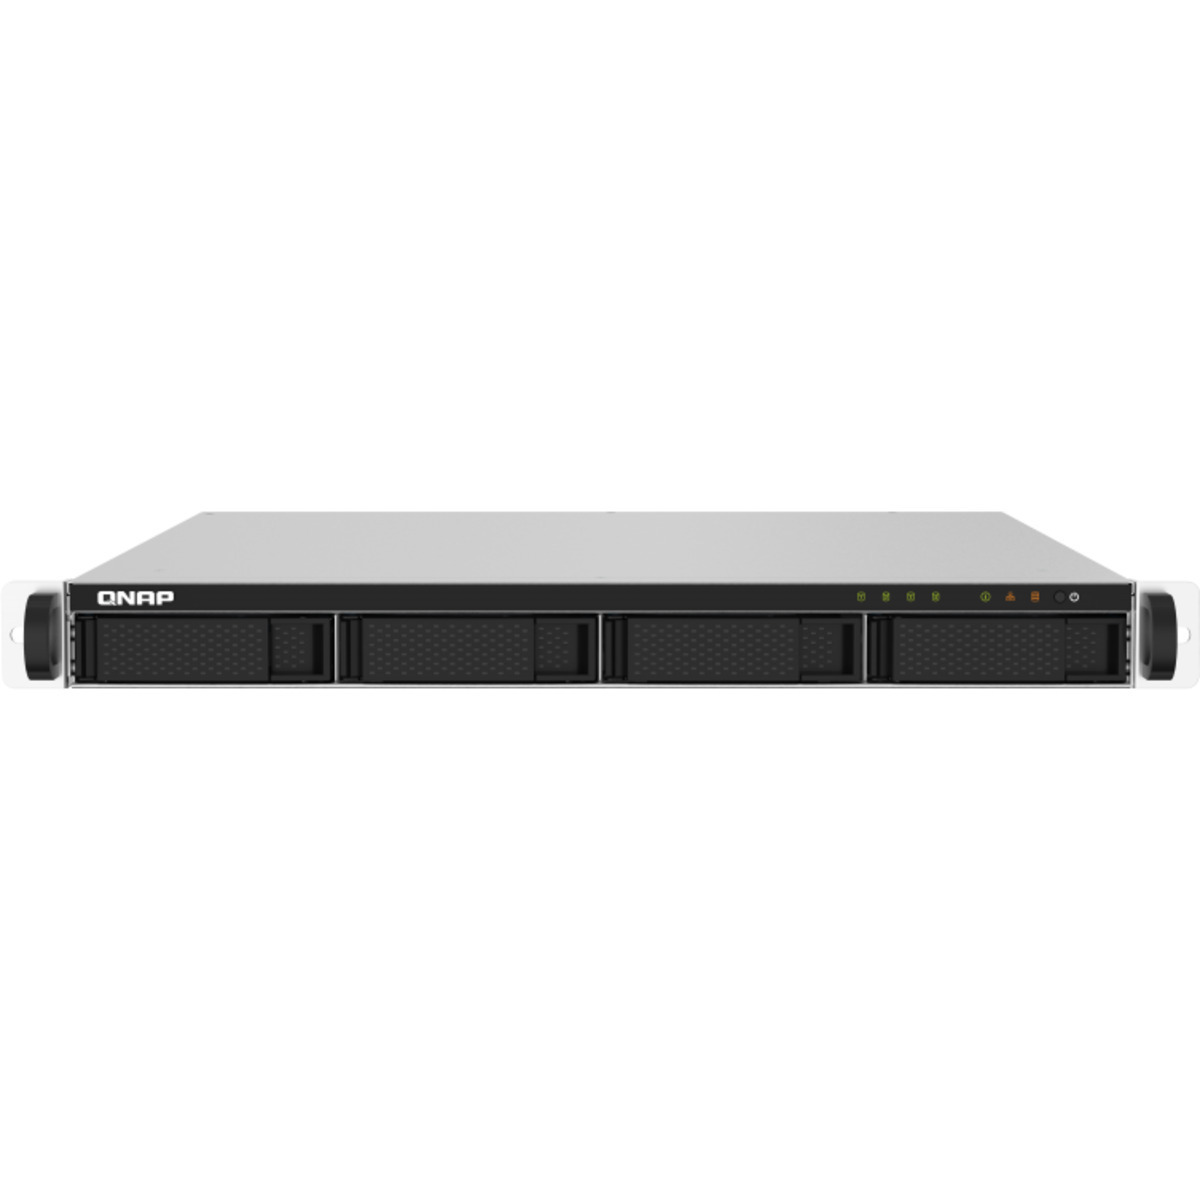 buy $1944 QNAP TS-432PXU 32tb RackMount NAS - Network Attached Storage Device 4x8000gb Toshiba Enterprise Capacity MG08ADA800E 3.5 7200rpm SATA 6Gb/s HDD ENTERPRISE Class Drives Installed - Burn-In Tested - ON SALE - FREE RAM UPGRADE - nas headquarters buy network attached storage server device das new raid-5 free shipping usa christmas new year holiday sale TS-432PXU